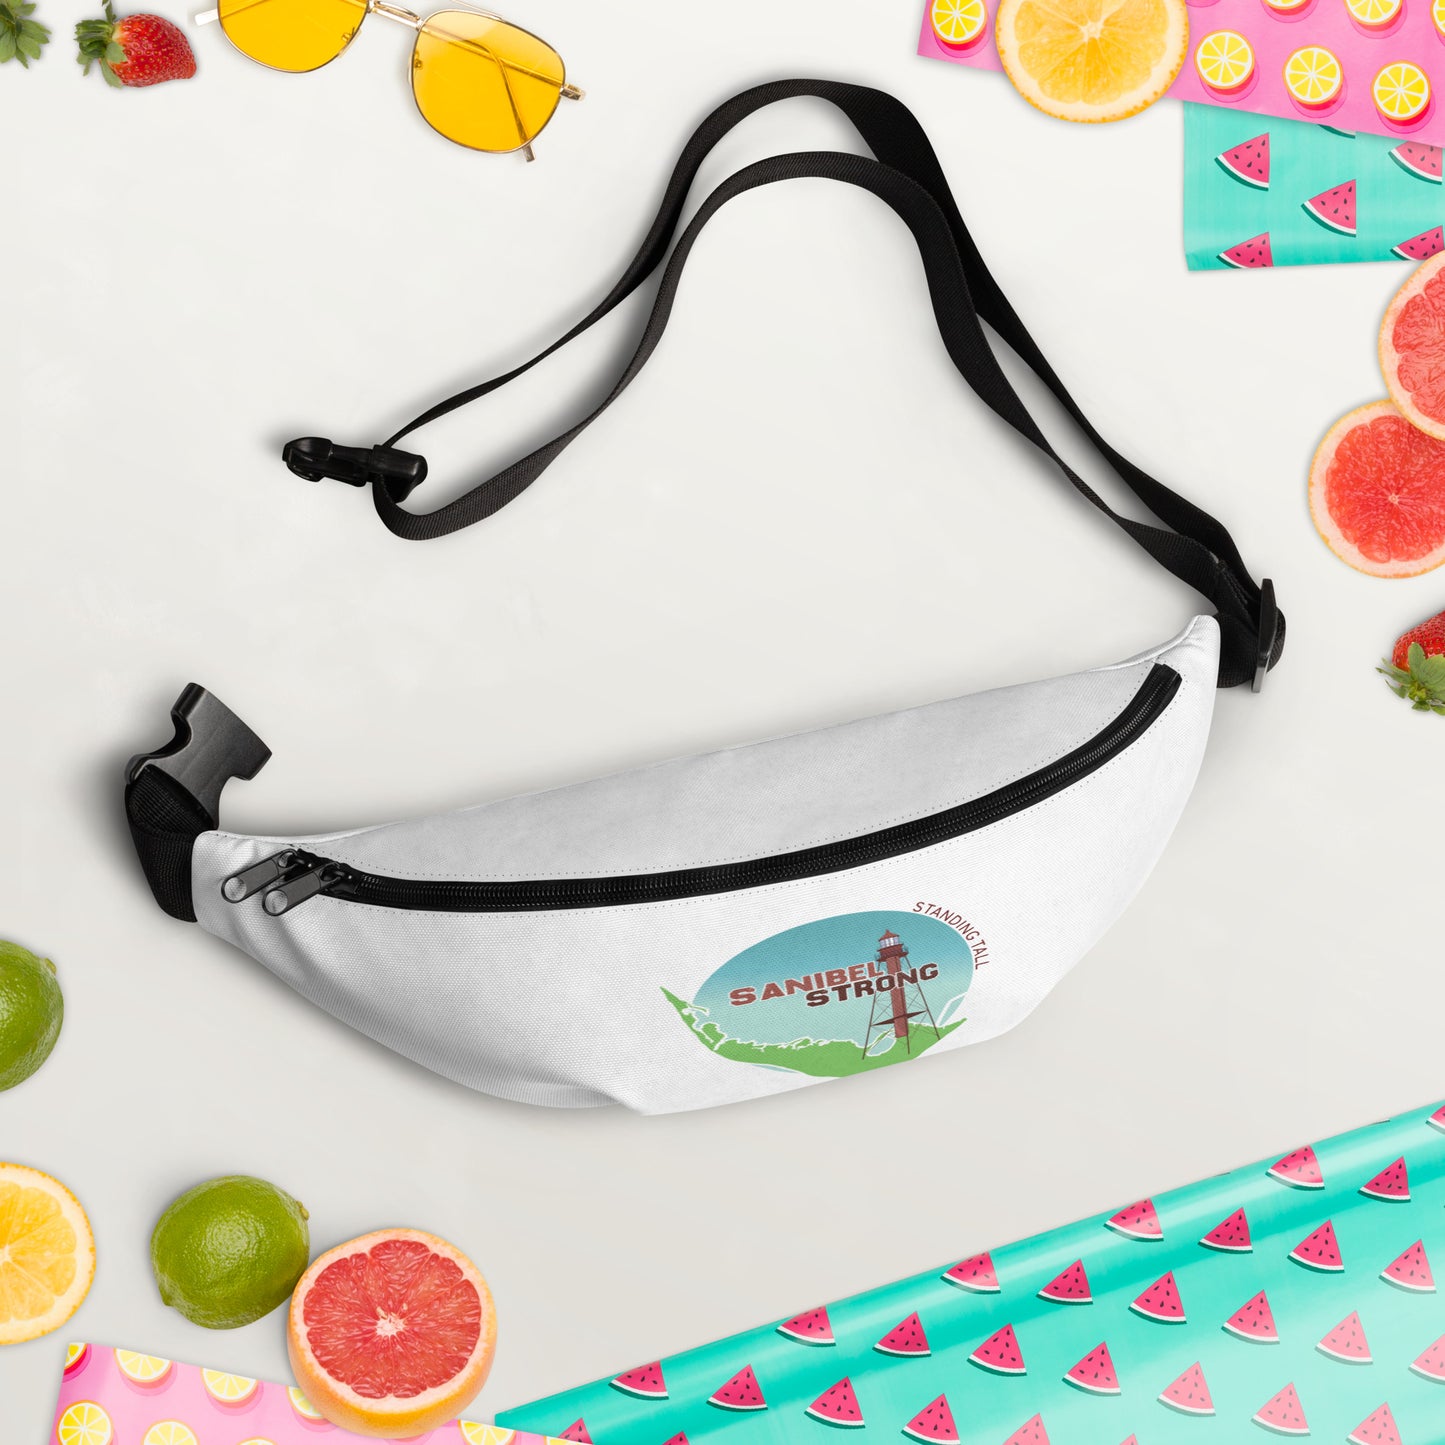 Sanibel Strong Standing Tall Fanny Pack